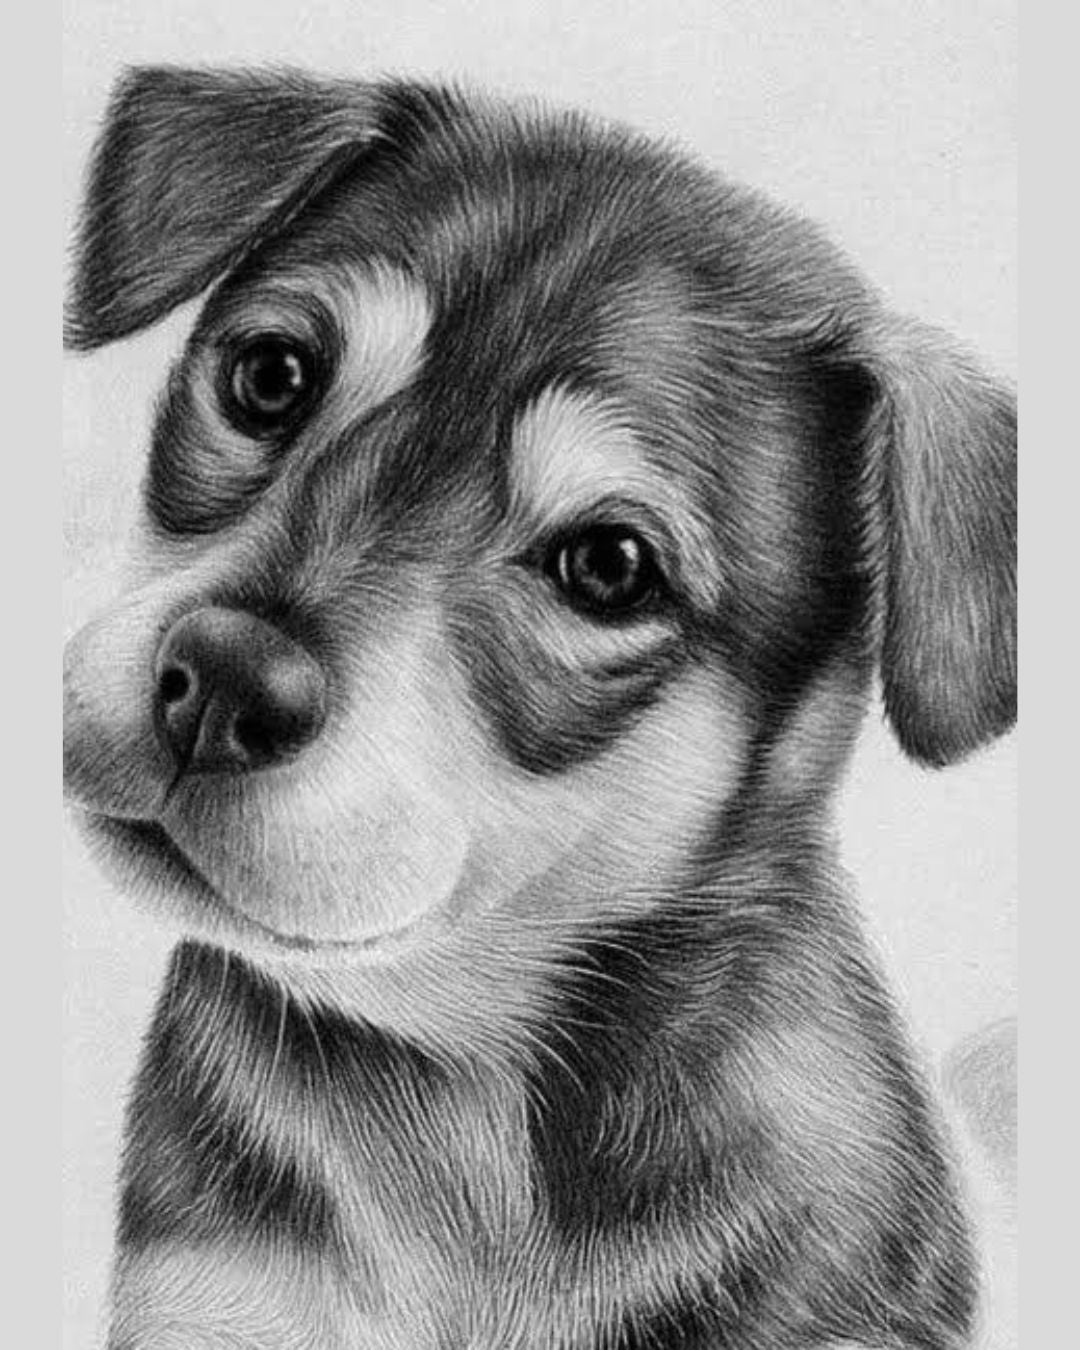 Handmade Pet Portraits:Dogs and Cats in Realistic Pencil Art